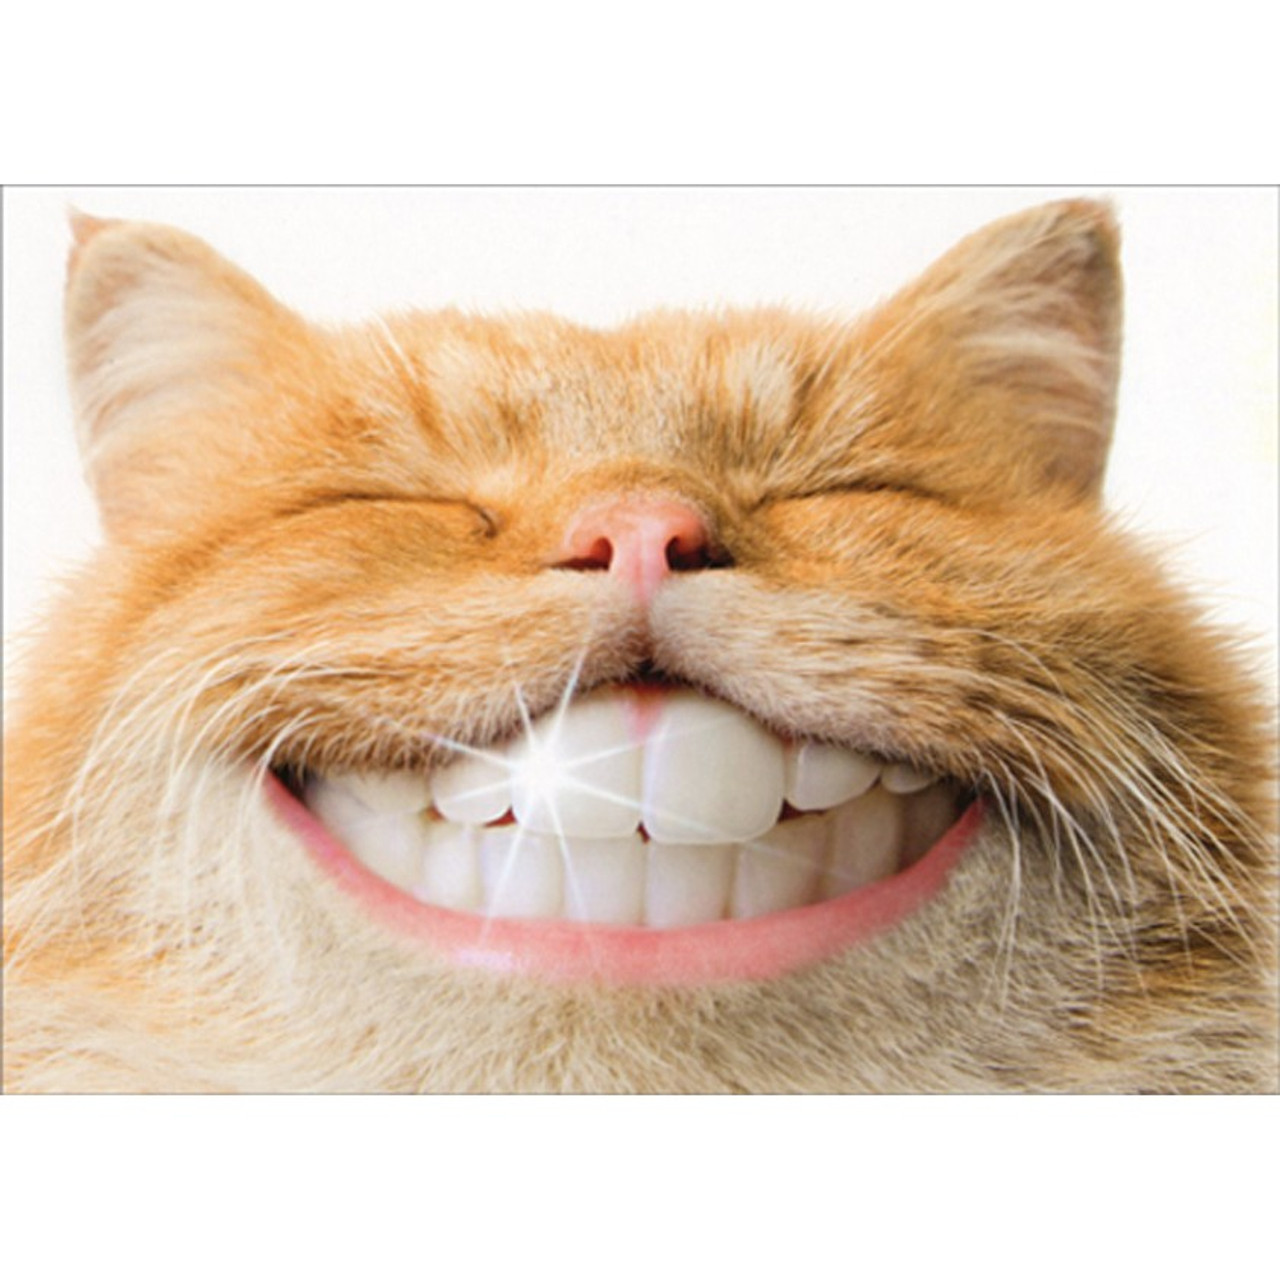 https://cdn11.bigcommerce.com/s-o3ewkiqyx3/images/stencil/1280x1280/products/1607/3445/cd17611-cat-with-shiny-human-teeth-funny-support-card__57326.1656195818.jpg?c=1